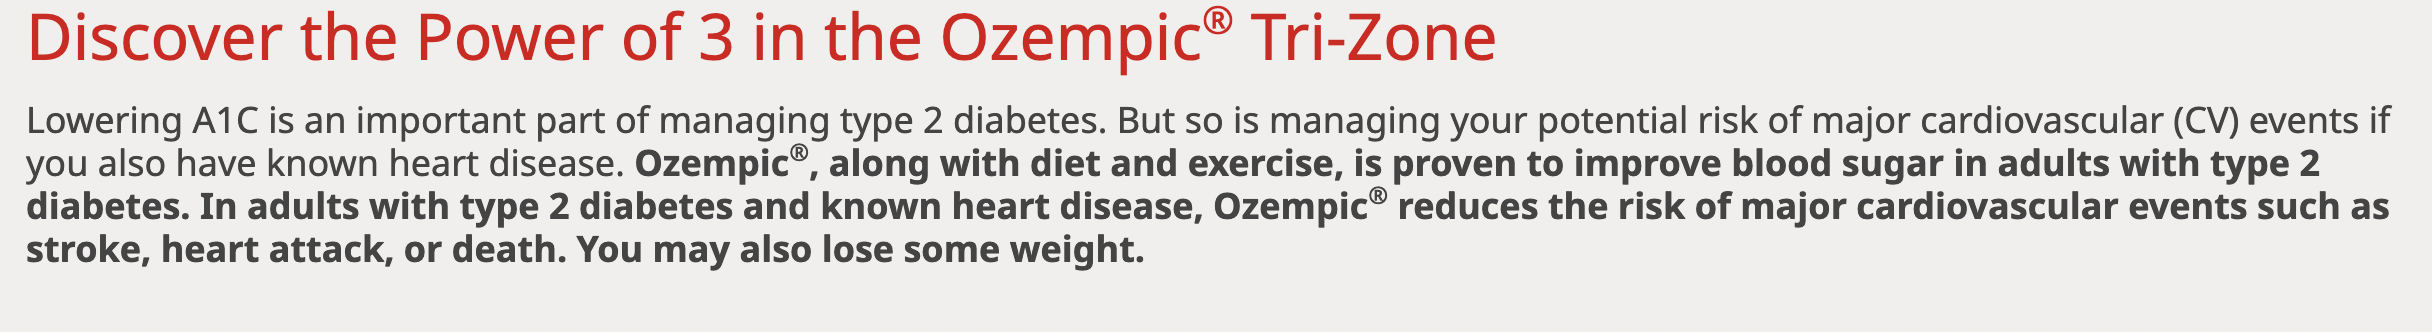 Ozempic screenshot about diet and exercise